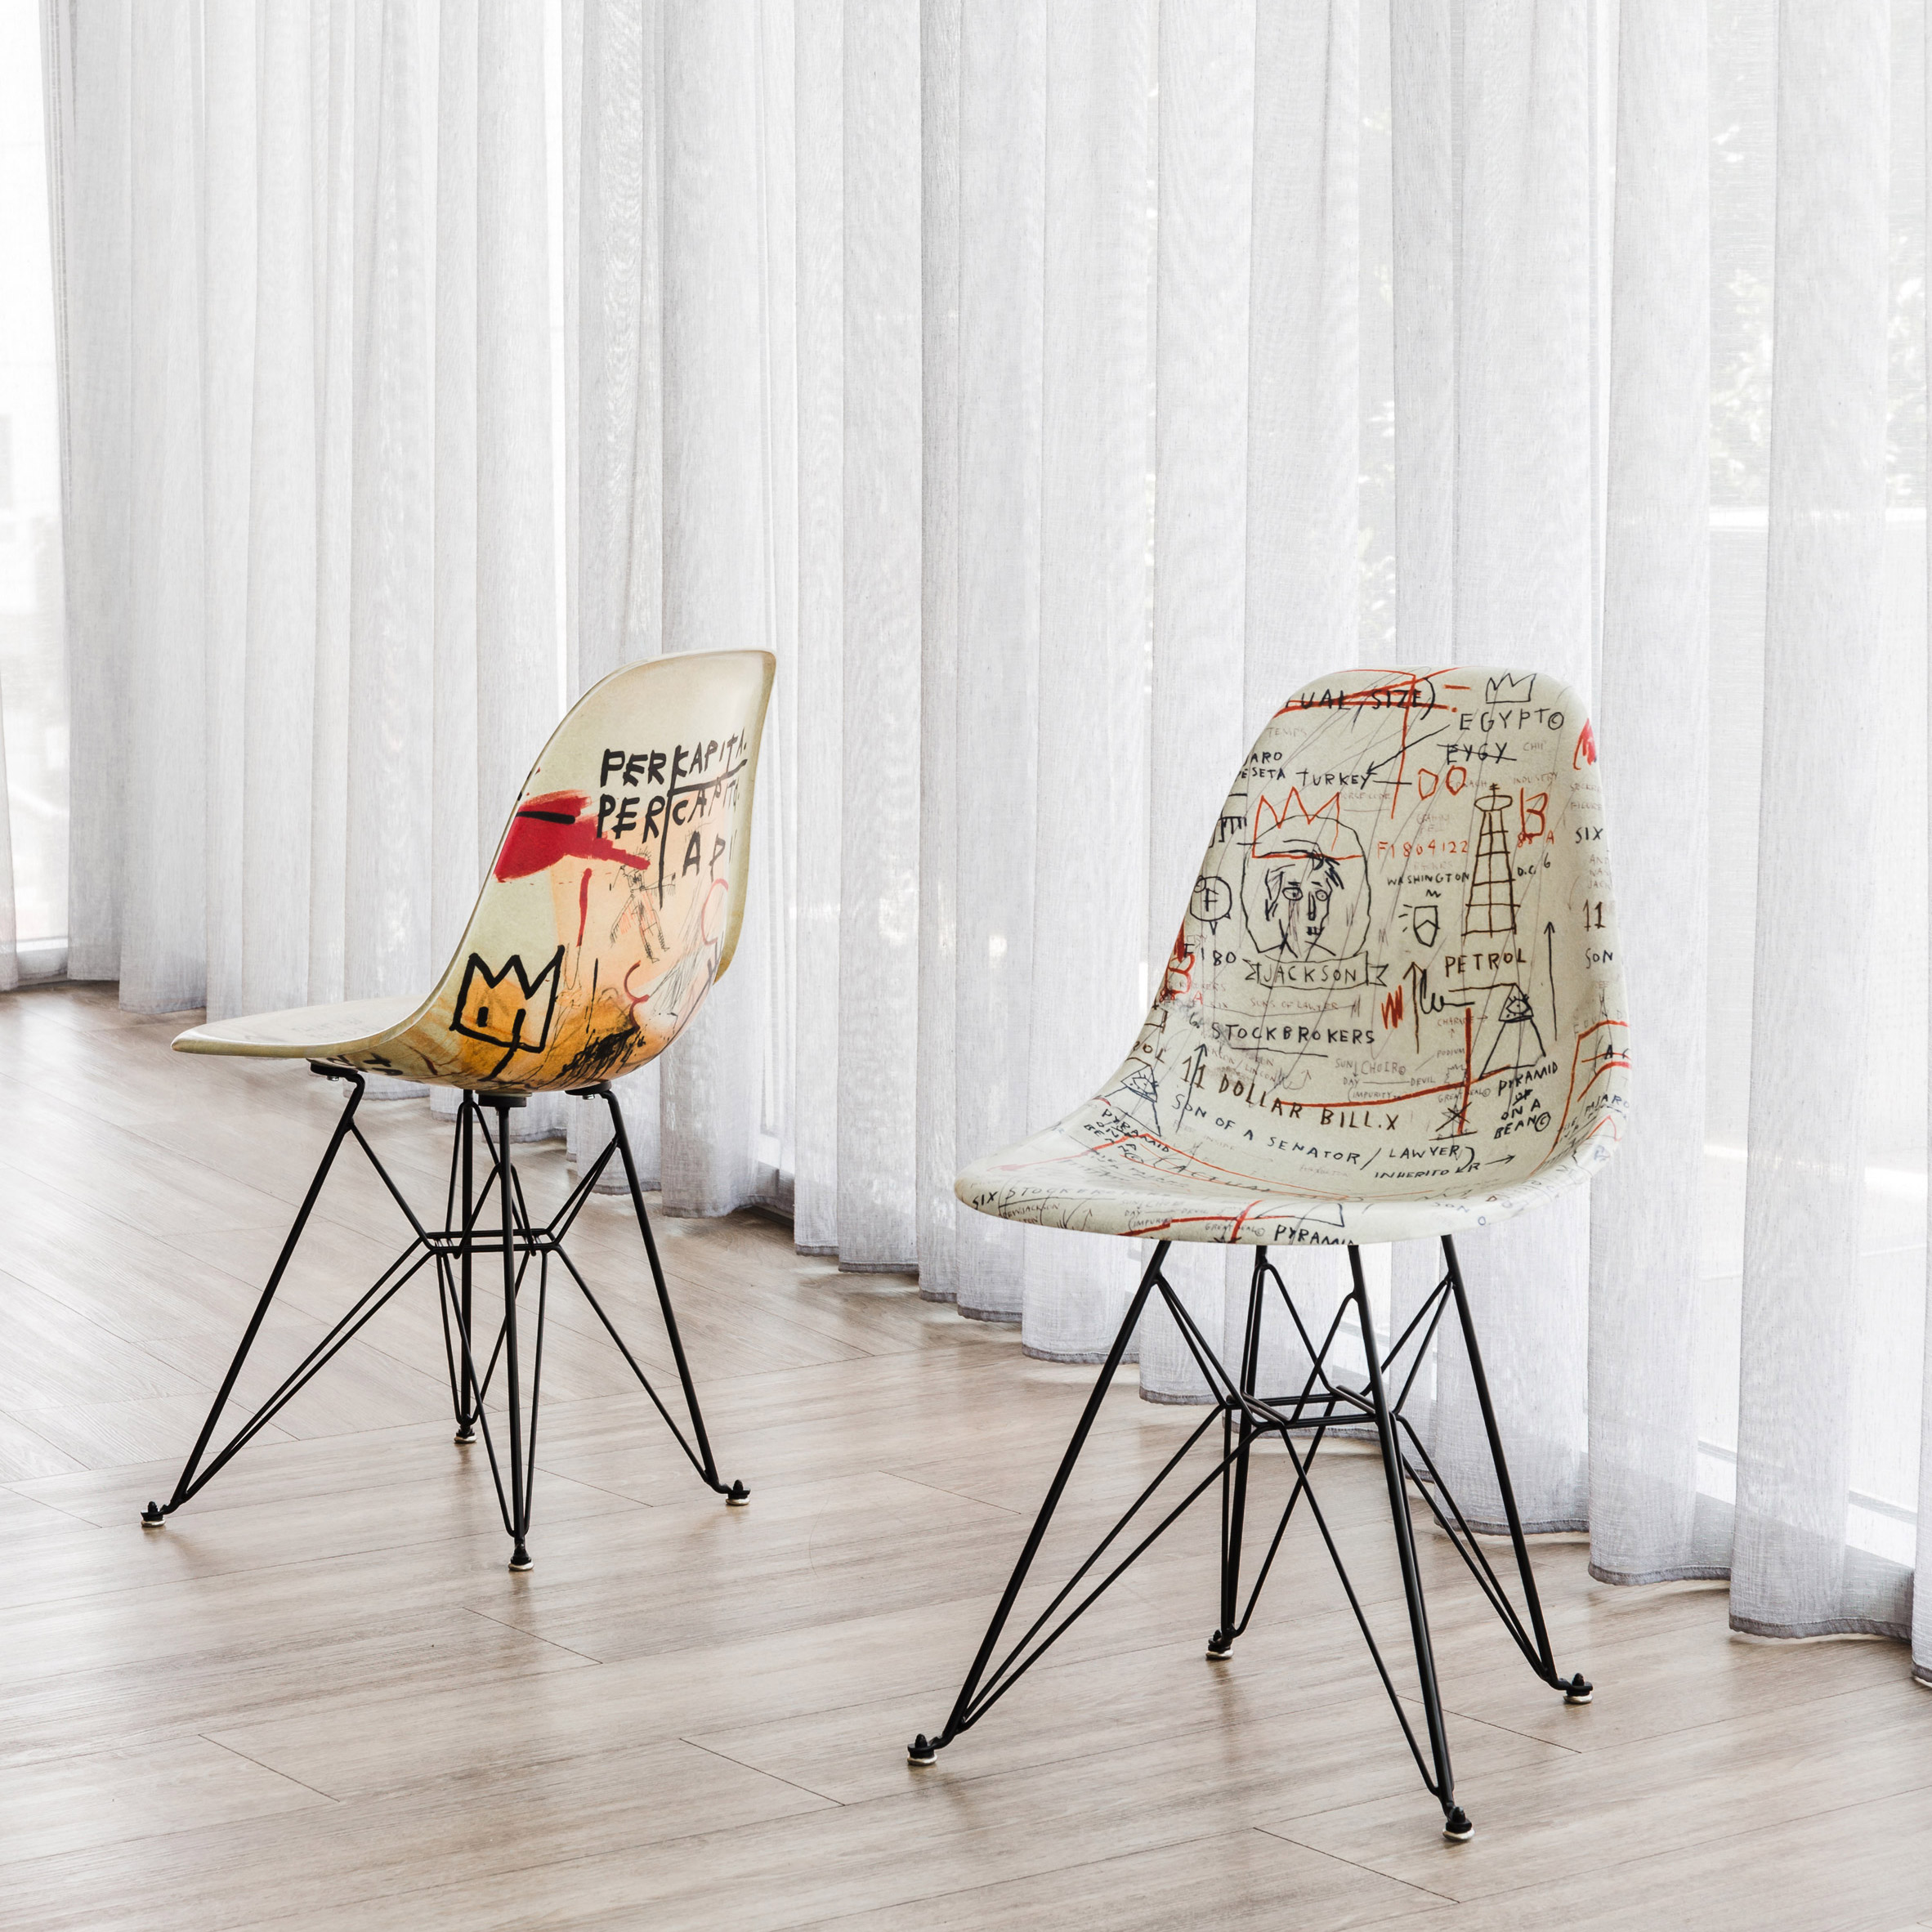 Artists create images for Modernica's Case Study chairs